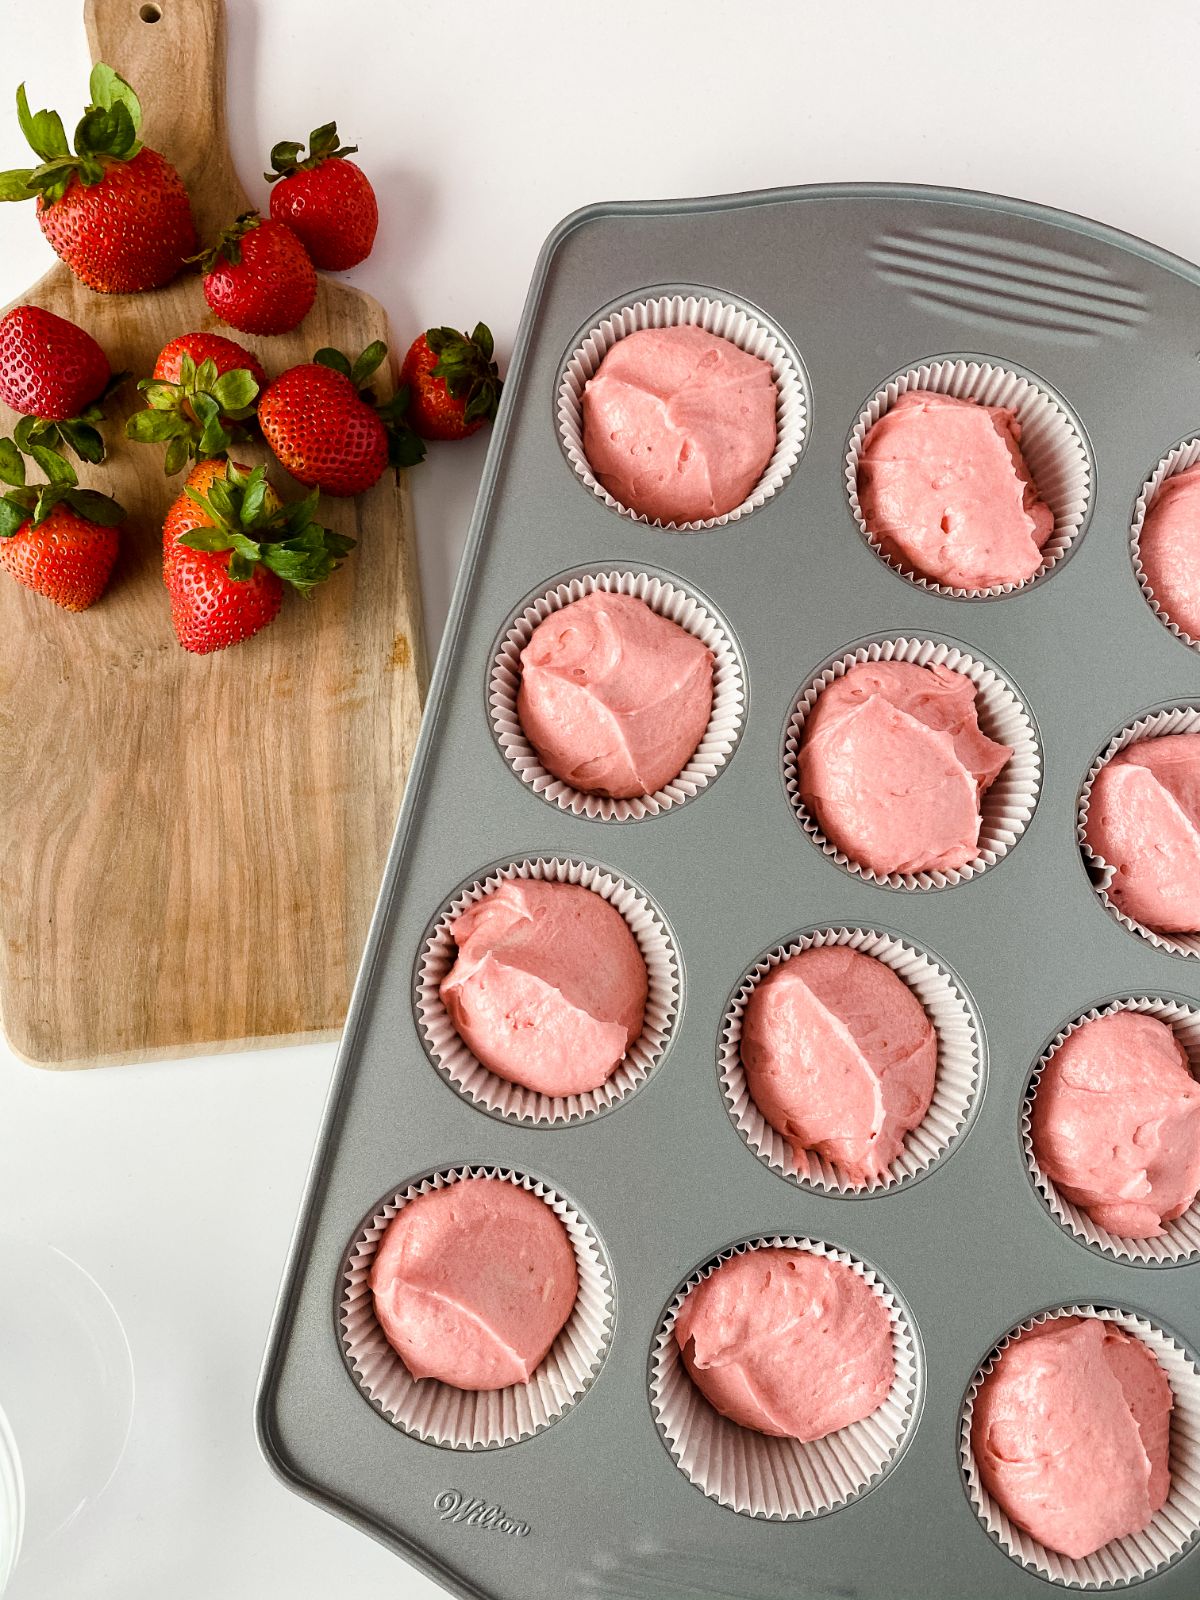 cake batter in baking tin by cutting board of berries